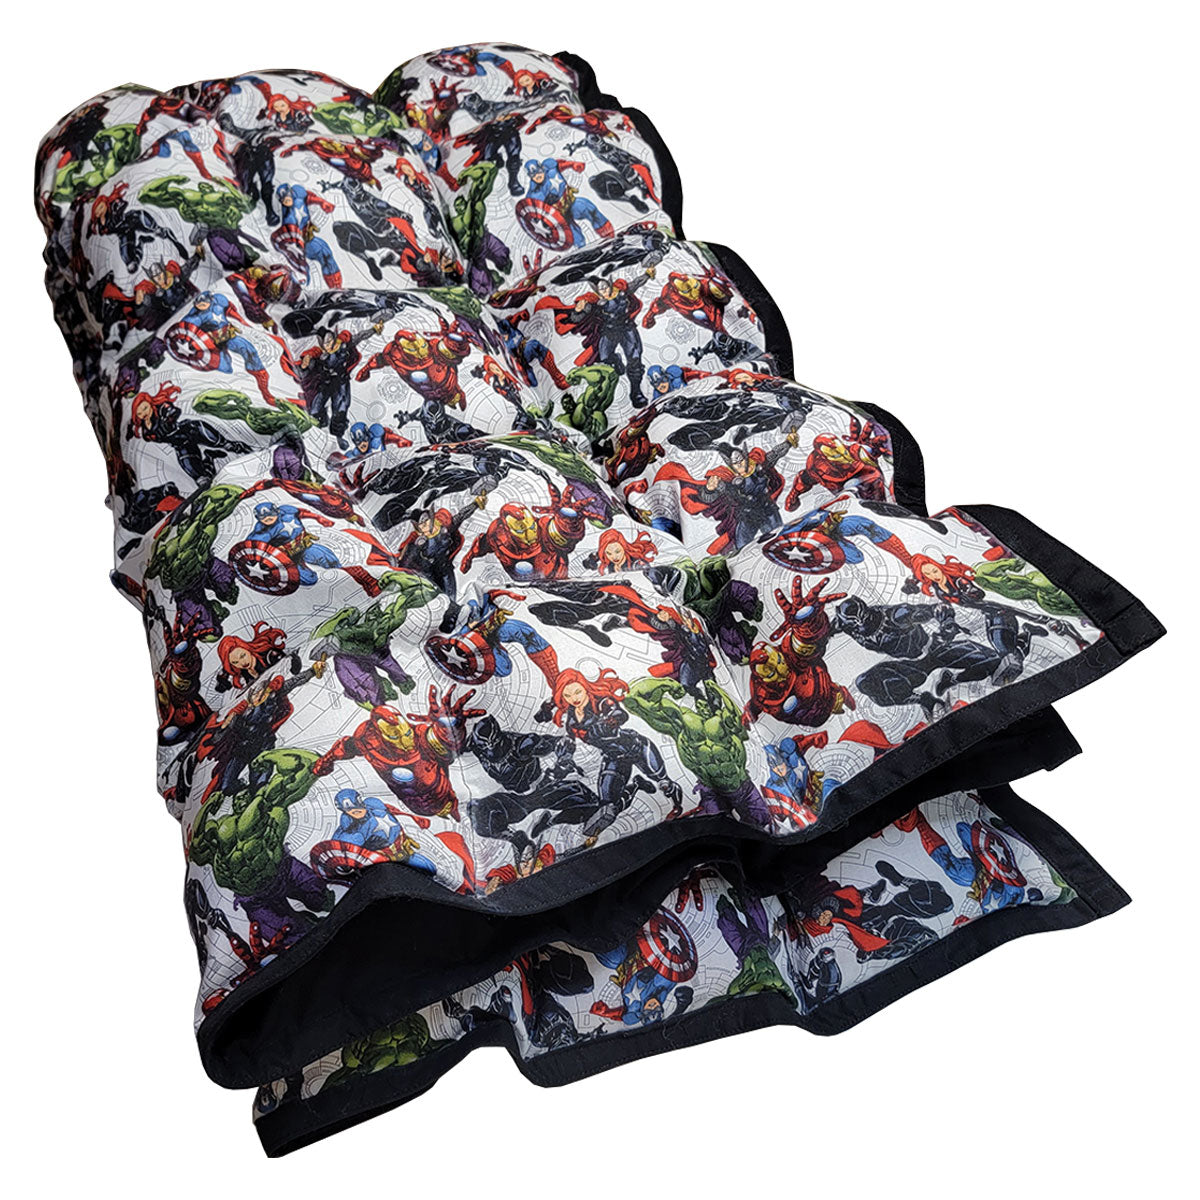 Clearance Weighted Blanket - Medium 9 lb Avengers (for 70 lb user)